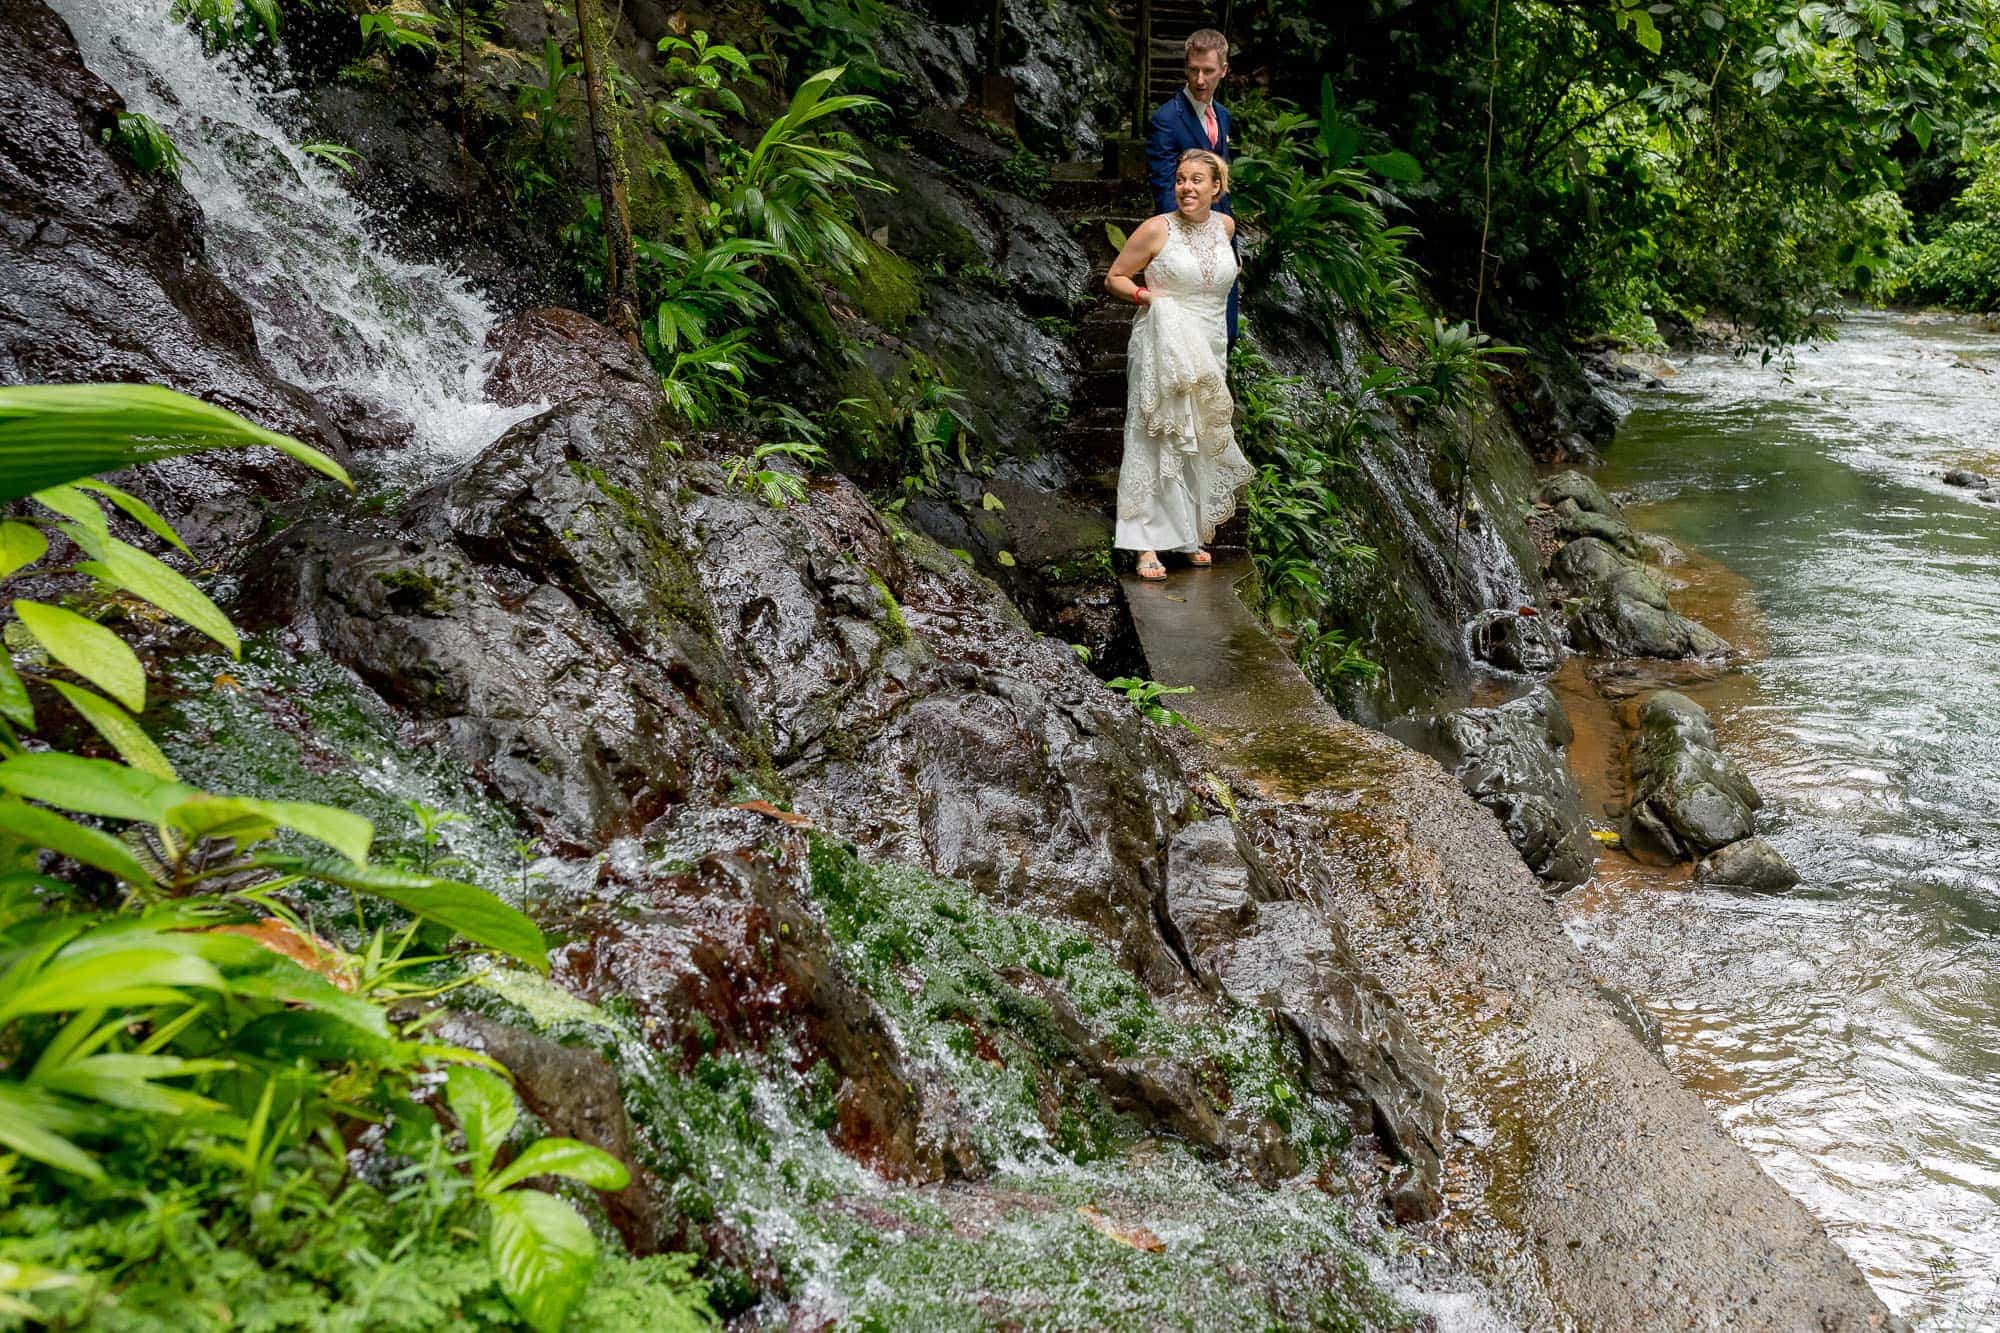 Bride and groom arriving at the waterfall